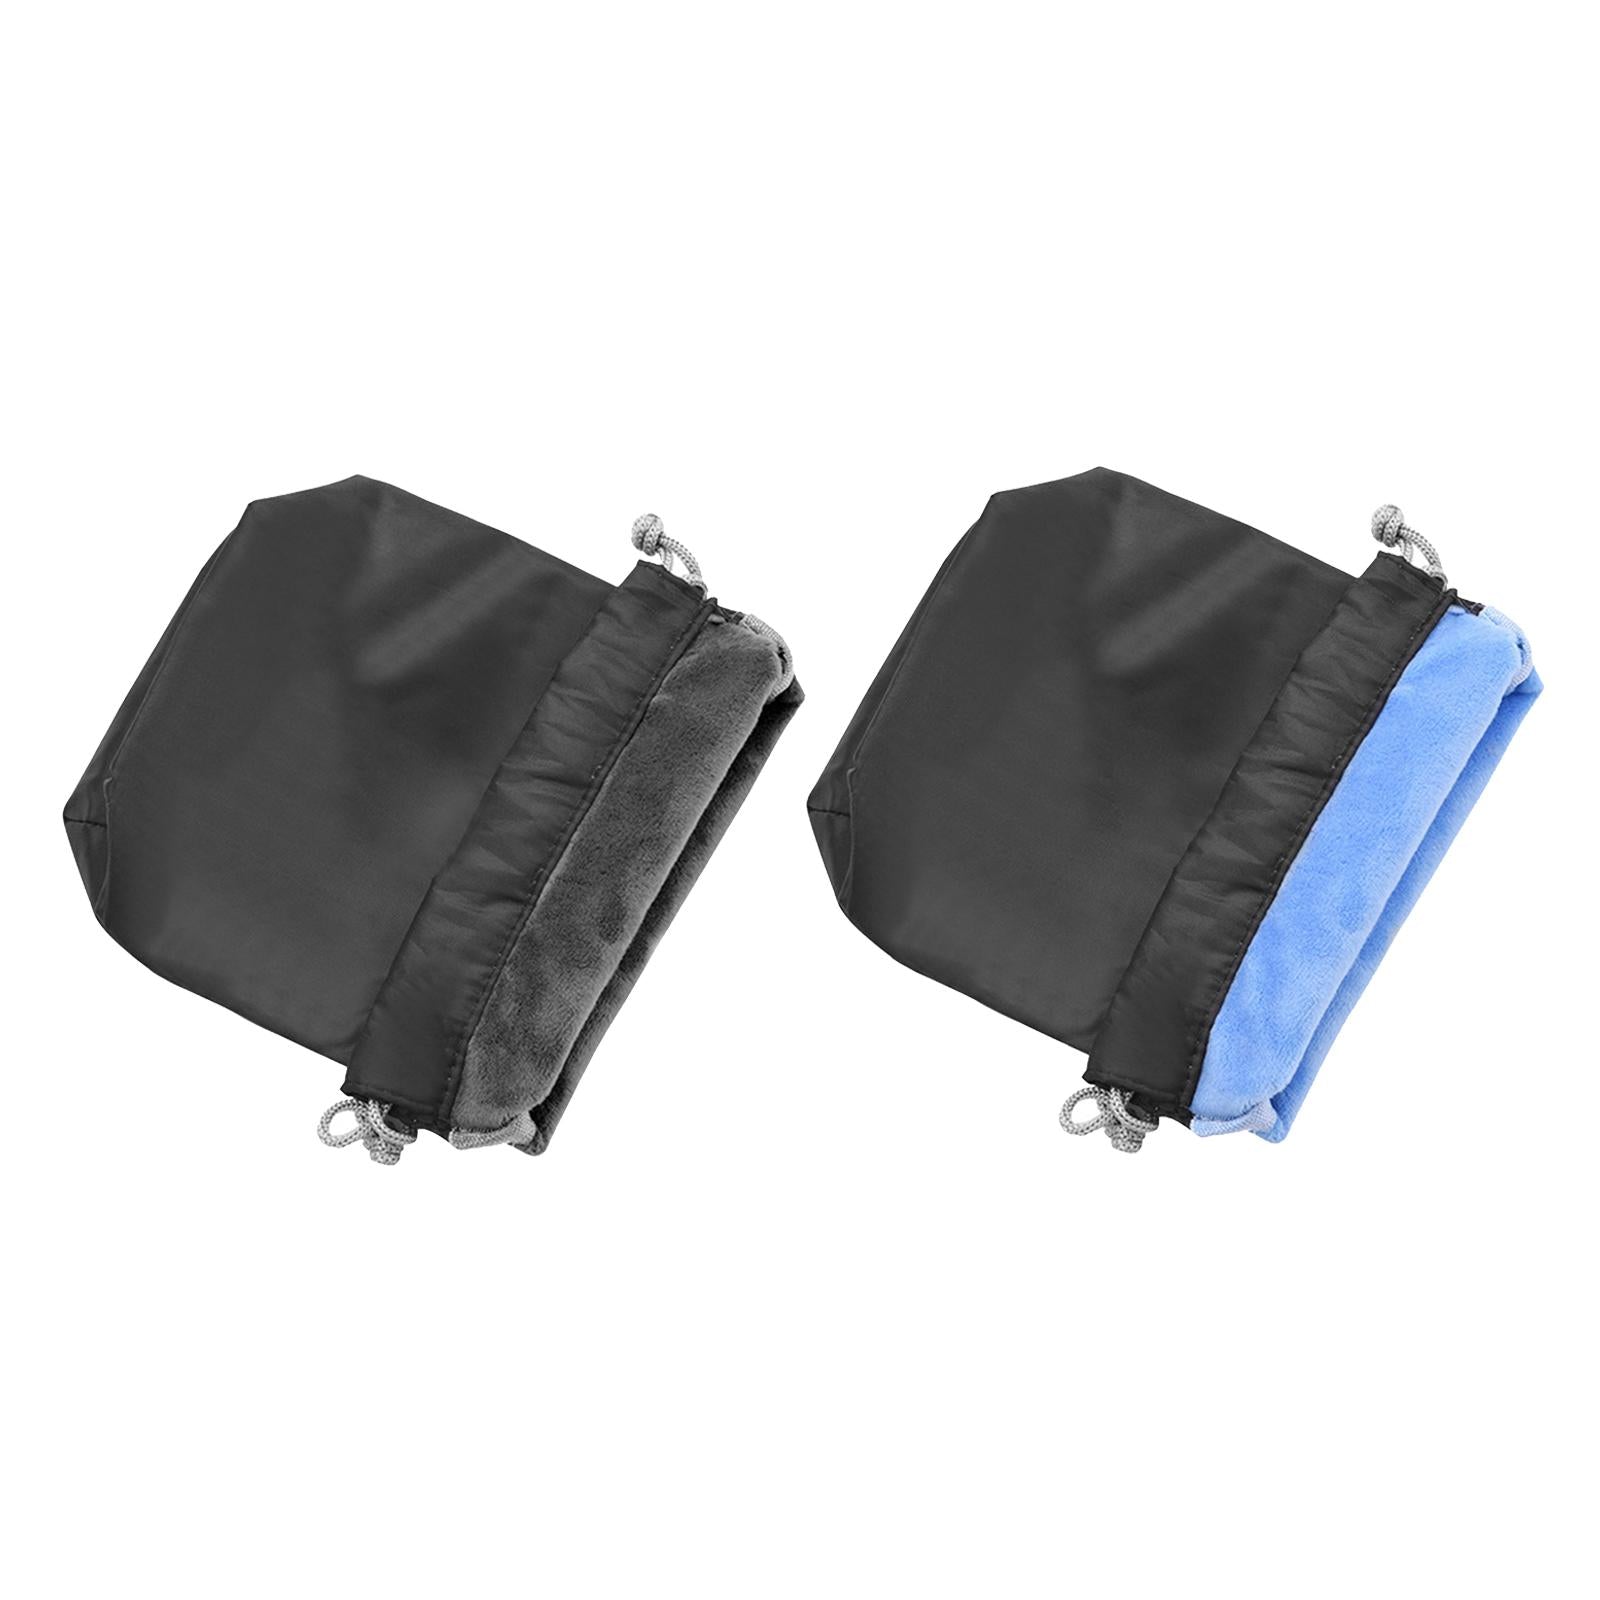 Waterproof Portable Carry Case Storage Bag for for DJI Mavic Air2 Black Gray